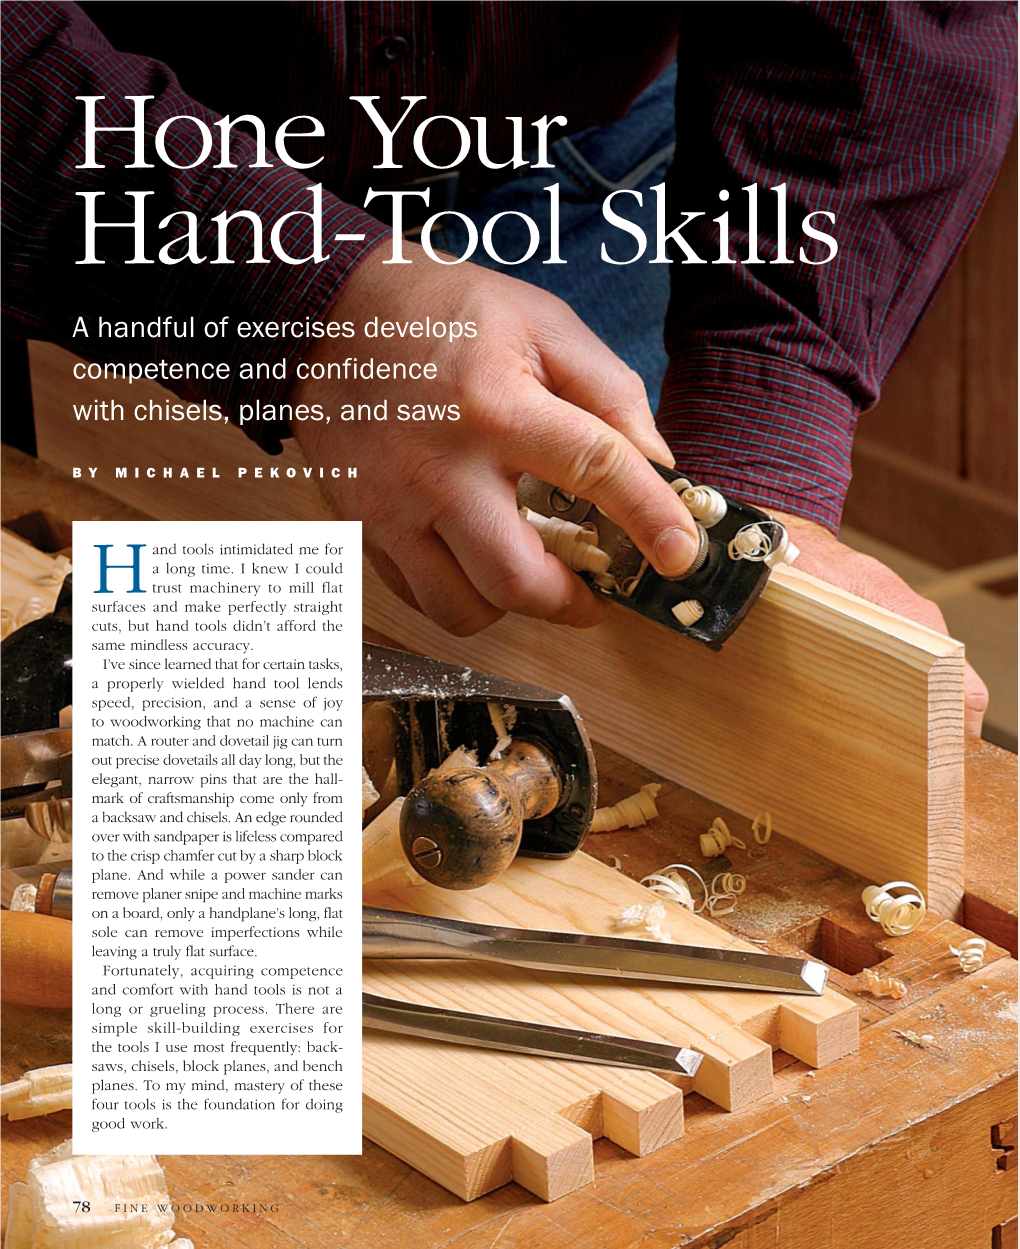 Hone Your Hand-Tool Skills a Handful of Exercises Develops Competence and Confidence with Chisels, Planes, and Saws